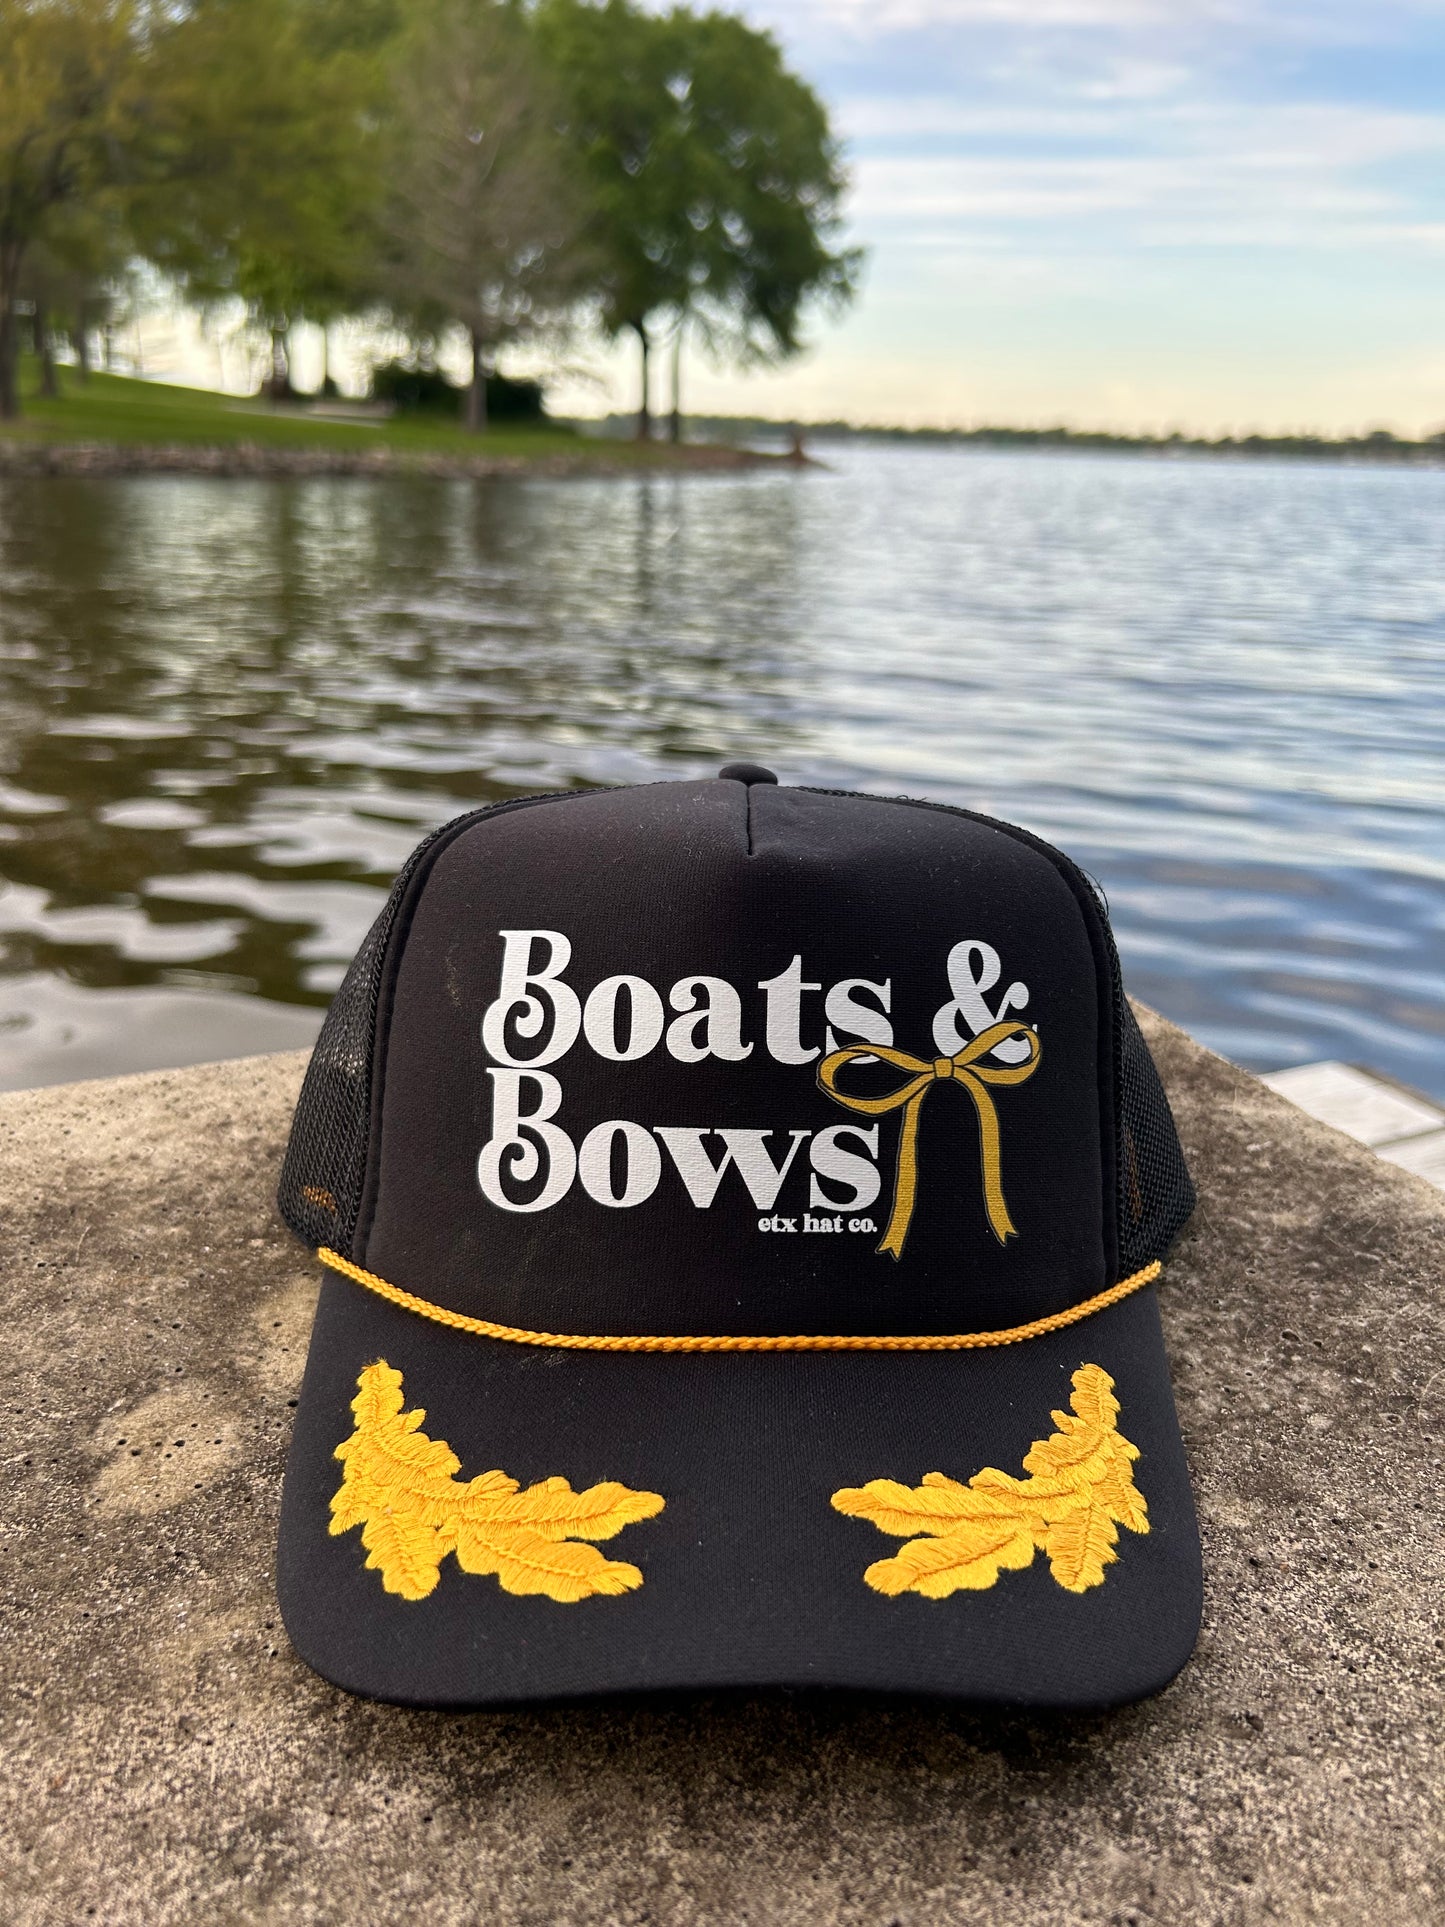 Boats & Bows - Golden